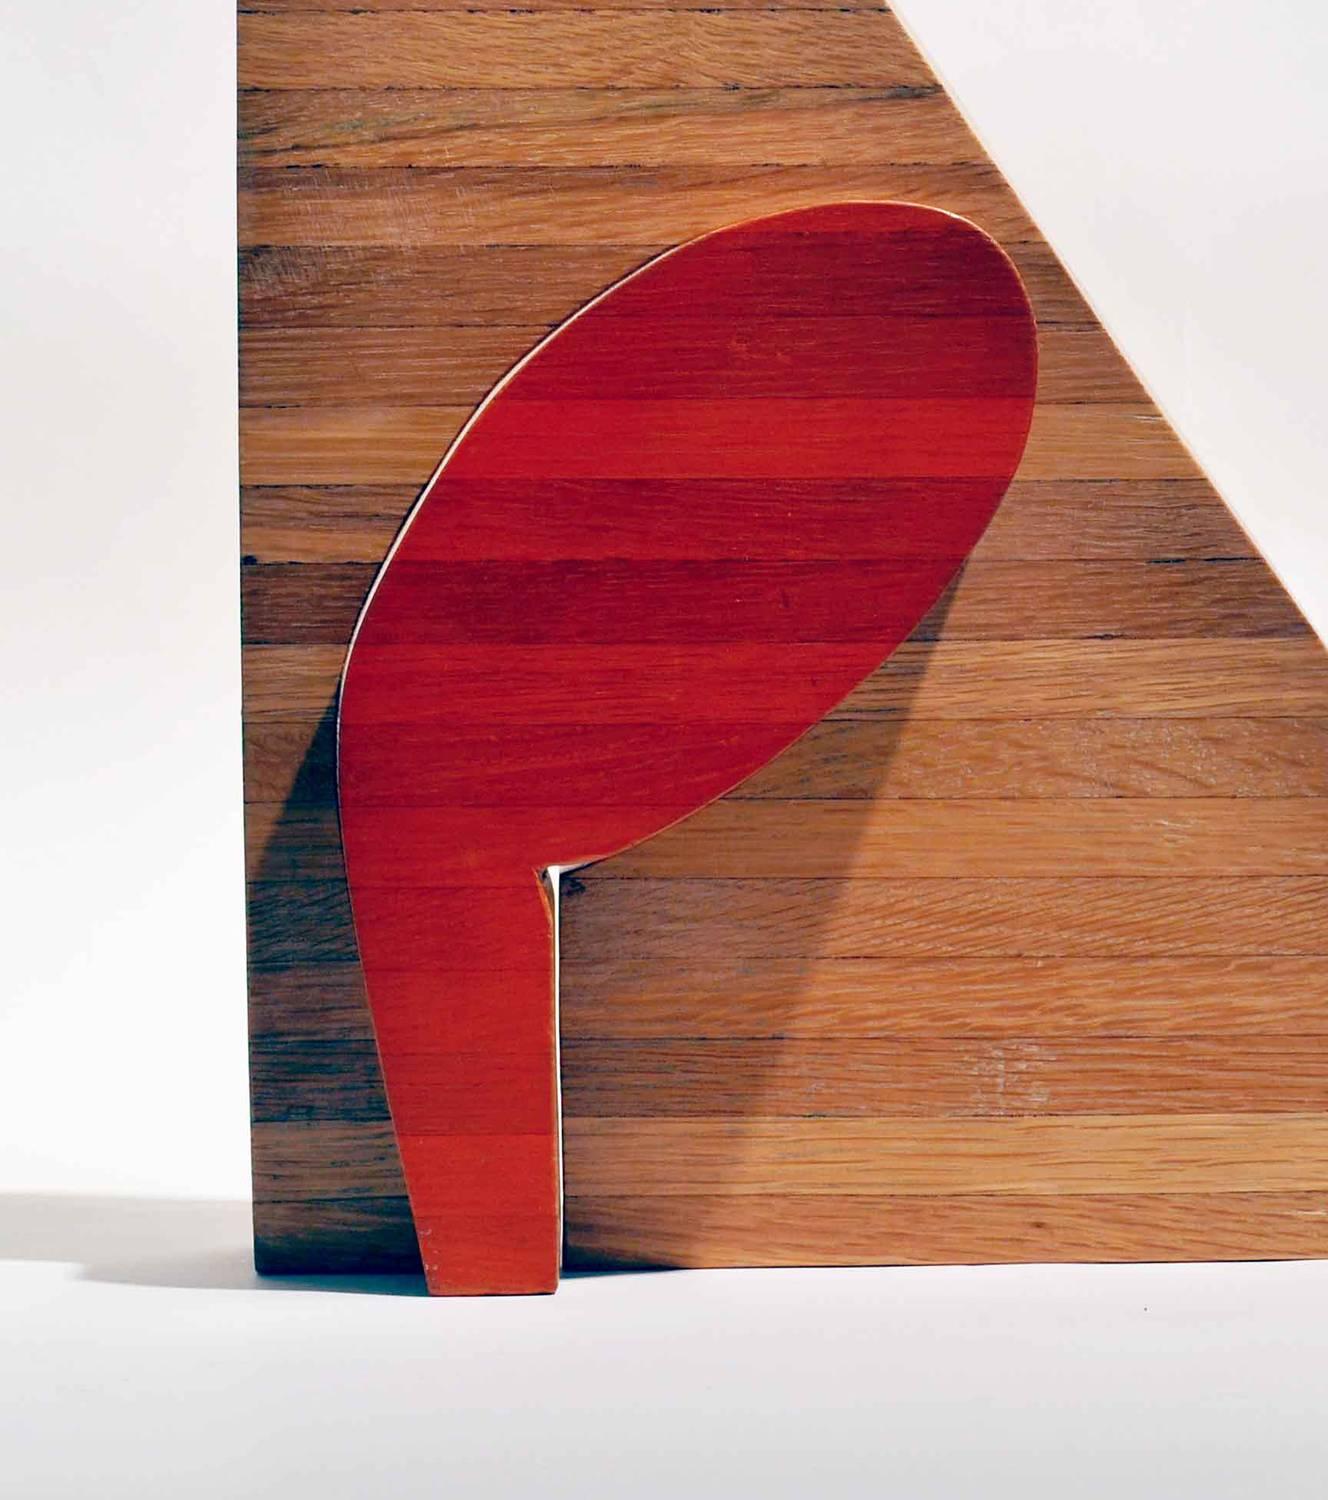 SAILING - mid-century modern sculpture - vintage geometric abstraction  - Sculpture by Doris Chase